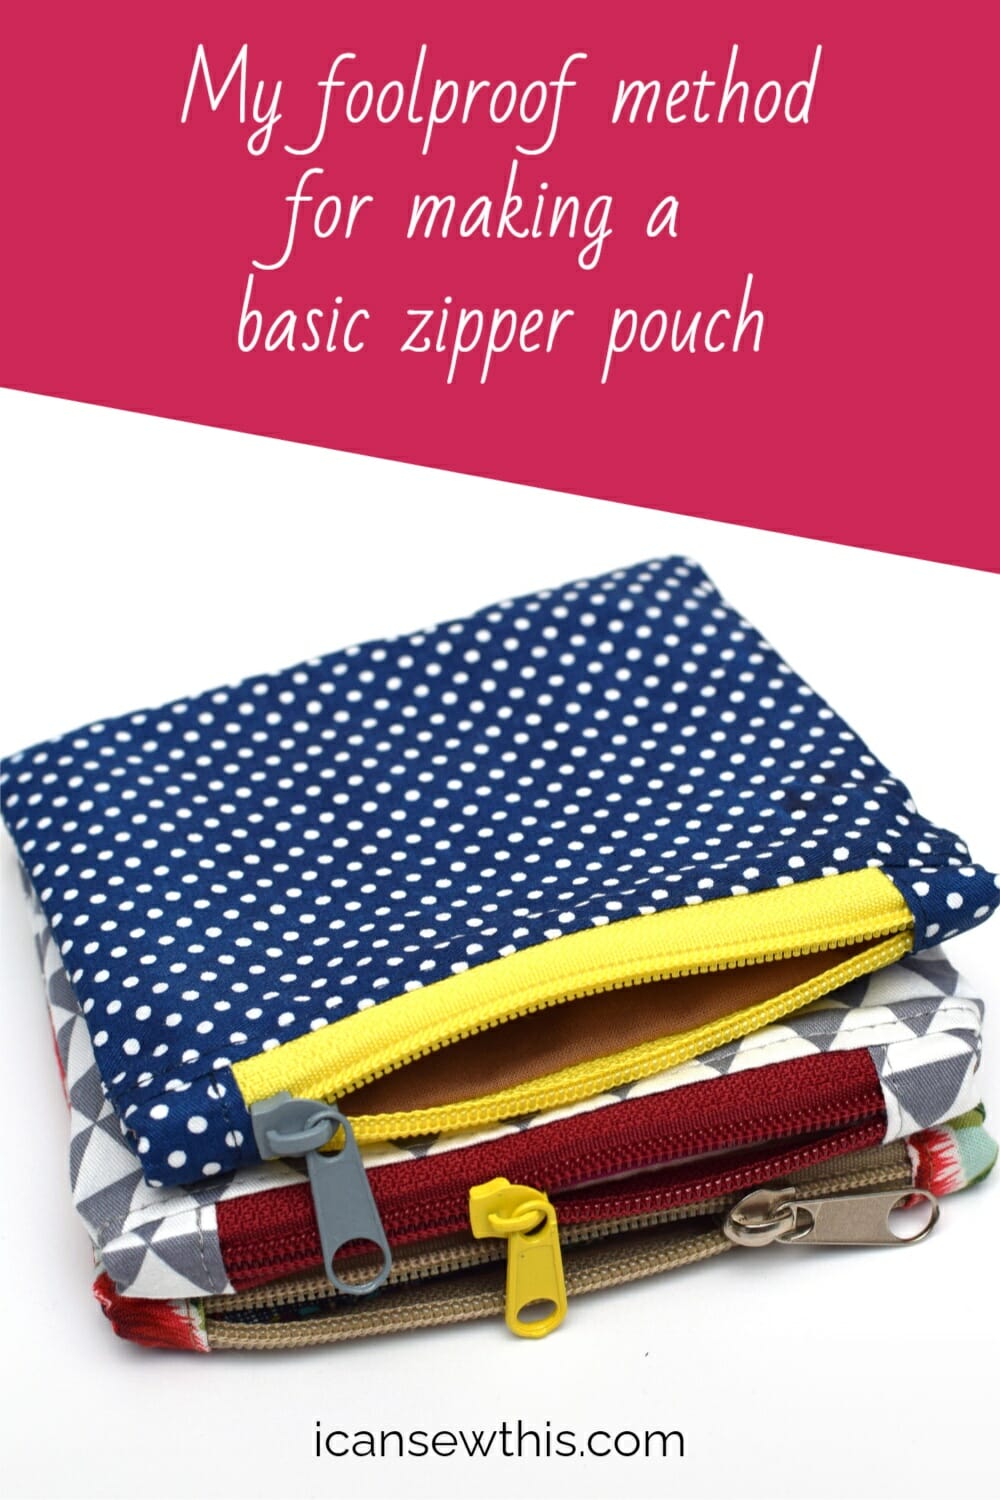 Small Valentine's Day Gifts: Zipper Change Purses